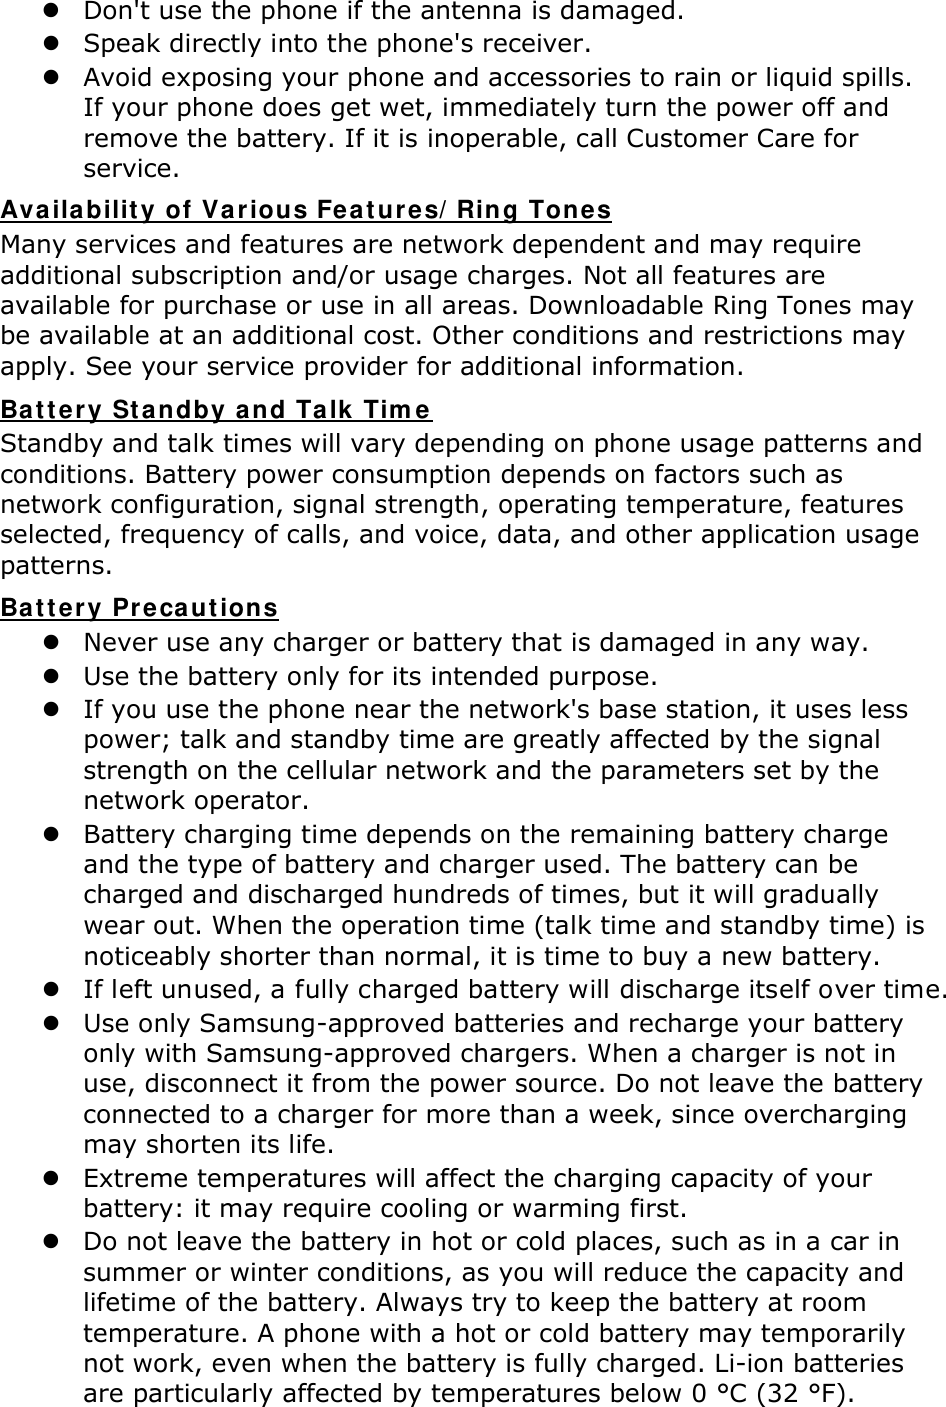  Don&apos;t use the phone if the antenna is damaged.  Speak directly into the phone&apos;s receiver.  Avoid exposing your phone and accessories to rain or liquid spills. If your phone does get wet, immediately turn the power off and remove the battery. If it is inoperable, call Customer Care for service. Availability of Various Features/Ring Tones Many services and features are network dependent and may require additional subscription and/or usage charges. Not all features are available for purchase or use in all areas. Downloadable Ring Tones may be available at an additional cost. Other conditions and restrictions may apply. See your service provider for additional information. Battery Standby and Talk Time Standby and talk times will vary depending on phone usage patterns and conditions. Battery power consumption depends on factors such as network configuration, signal strength, operating temperature, features selected, frequency of calls, and voice, data, and other application usage patterns.   Battery Precautions  Never use any charger or battery that is damaged in any way.  Use the battery only for its intended purpose.  If you use the phone near the network&apos;s base station, it uses less power; talk and standby time are greatly affected by the signal strength on the cellular network and the parameters set by the network operator.  Battery charging time depends on the remaining battery charge and the type of battery and charger used. The battery can be charged and discharged hundreds of times, but it will gradually wear out. When the operation time (talk time and standby time) is noticeably shorter than normal, it is time to buy a new battery.  If left unused, a fully charged battery will discharge itself over time.  Use only Samsung-approved batteries and recharge your battery only with Samsung-approved chargers. When a charger is not in use, disconnect it from the power source. Do not leave the battery connected to a charger for more than a week, since overcharging may shorten its life.  Extreme temperatures will affect the charging capacity of your battery: it may require cooling or warming first.  Do not leave the battery in hot or cold places, such as in a car in summer or winter conditions, as you will reduce the capacity and lifetime of the battery. Always try to keep the battery at room temperature. A phone with a hot or cold battery may temporarily not work, even when the battery is fully charged. Li-ion batteries are particularly affected by temperatures below 0 °C (32 °F). 